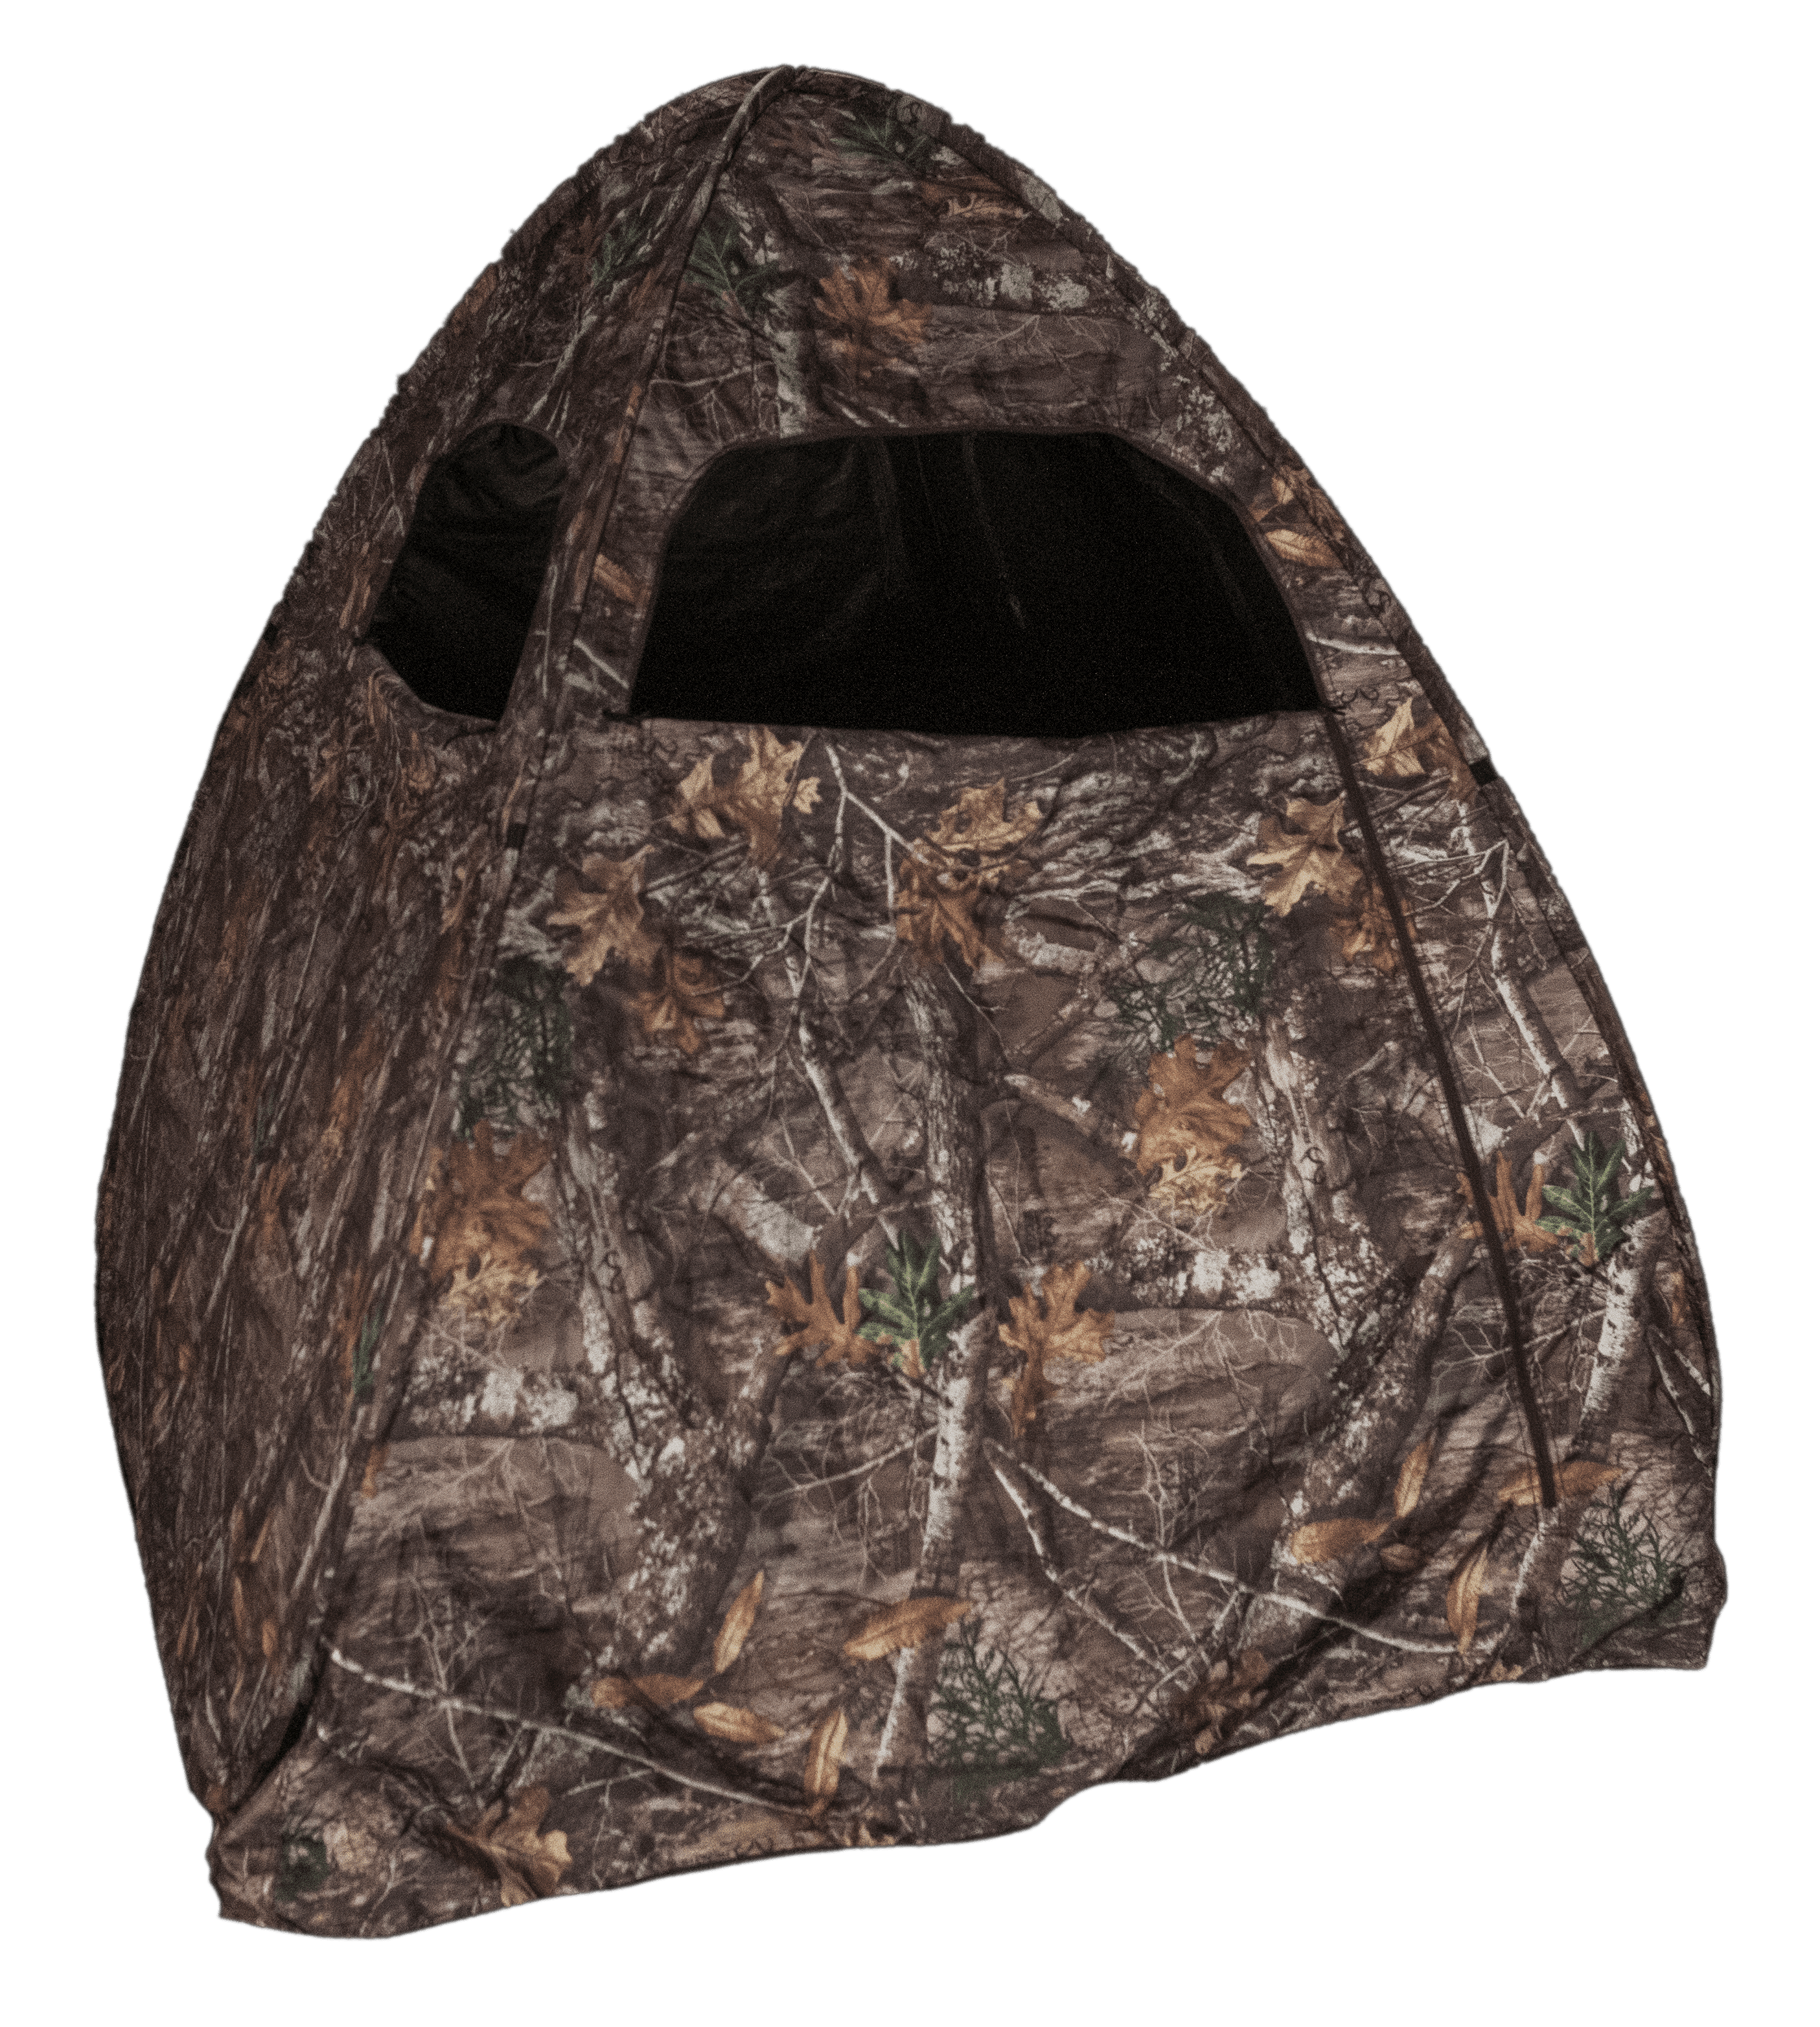 Deer Turkey Portable Camo Pop-Up Ground Hunting Blind with Backpack 60"x60"x65" 